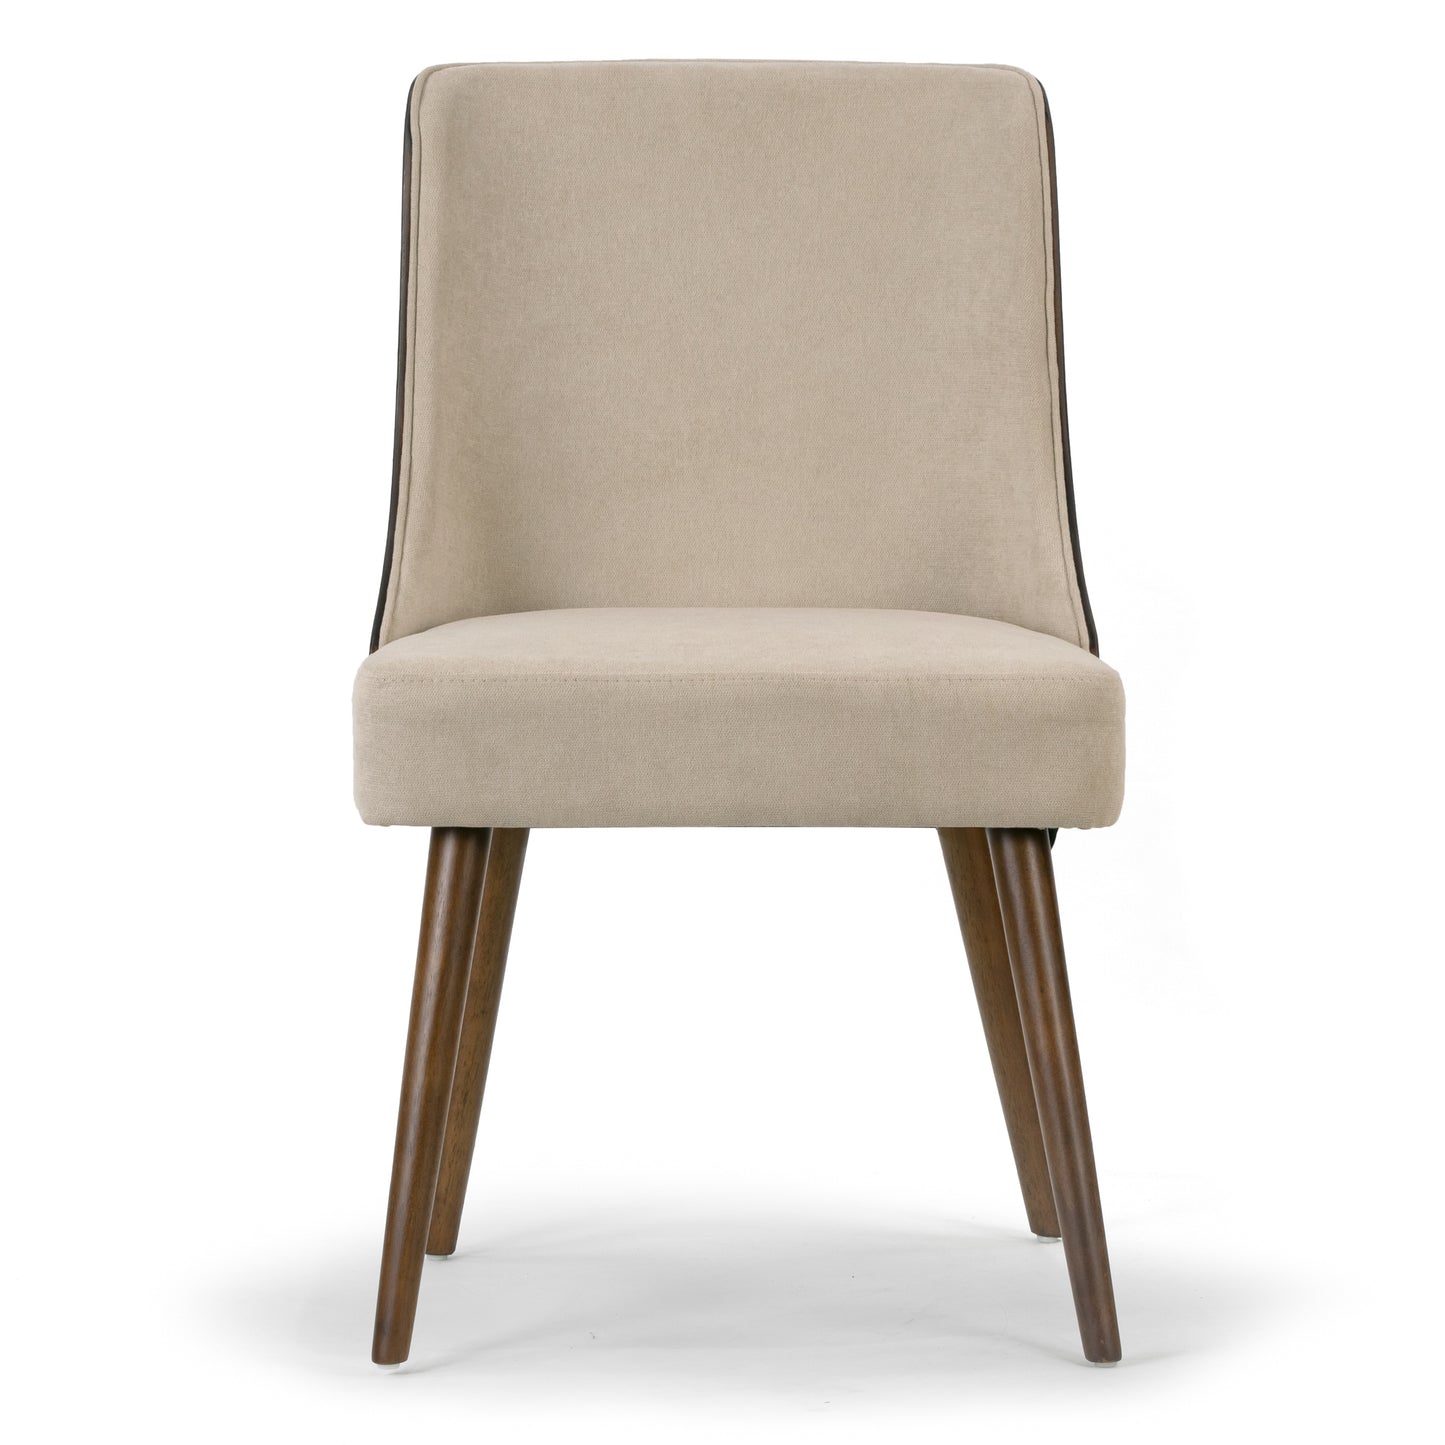 Set of 2 Asma Beige Fabric Chair with Dark Brown Bentwood Back and Solid Wood Legs